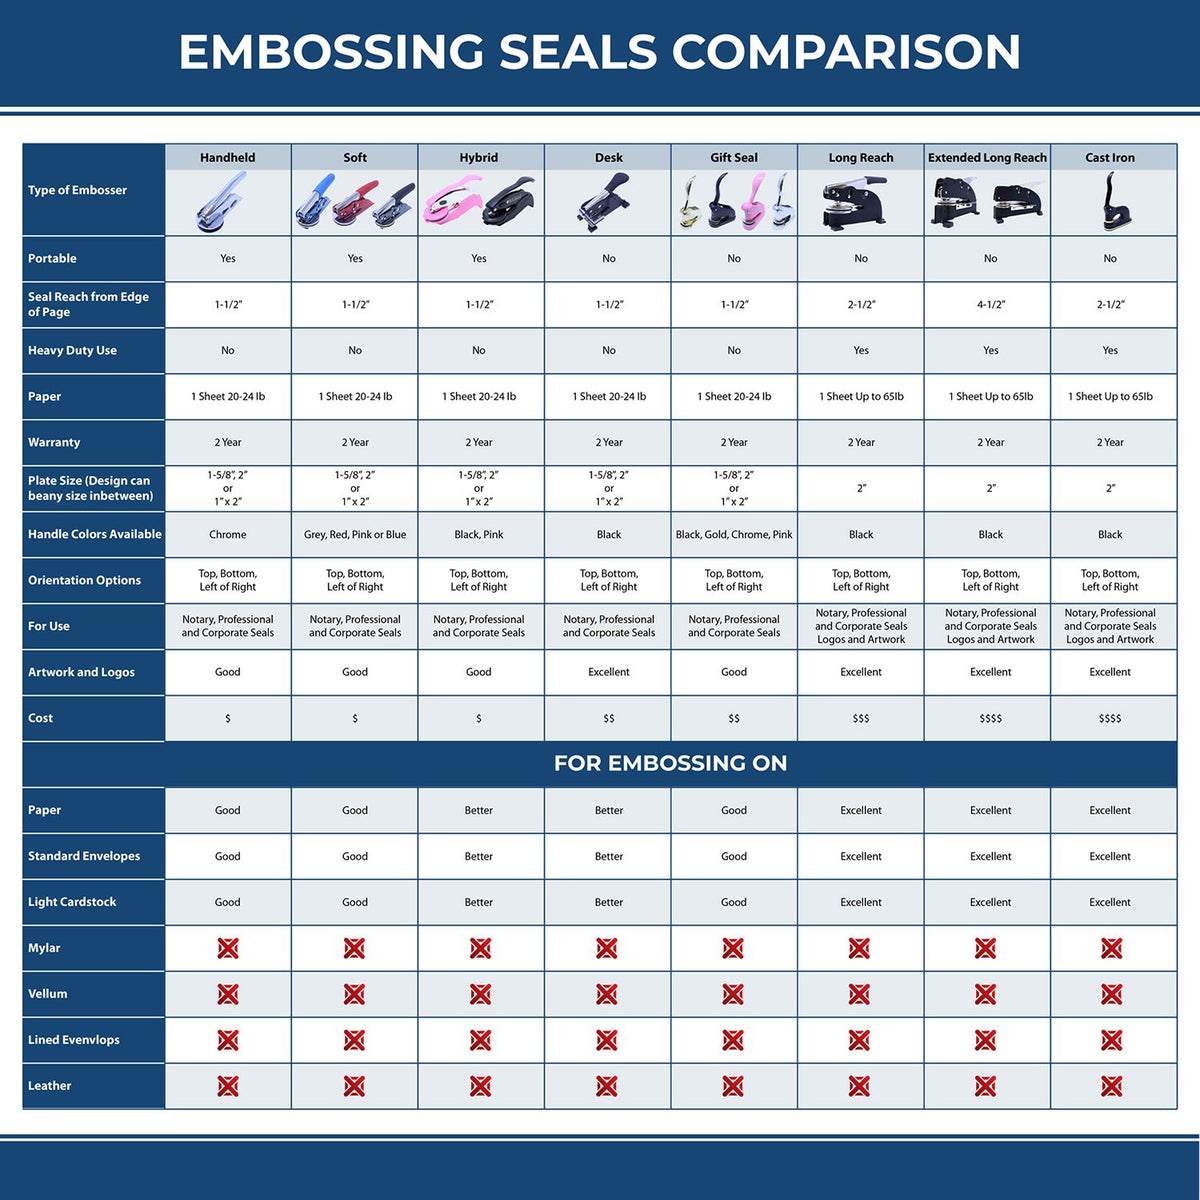 A comparison chart for the different types of mount models available for the Gift Kentucky Land Surveyor Seal